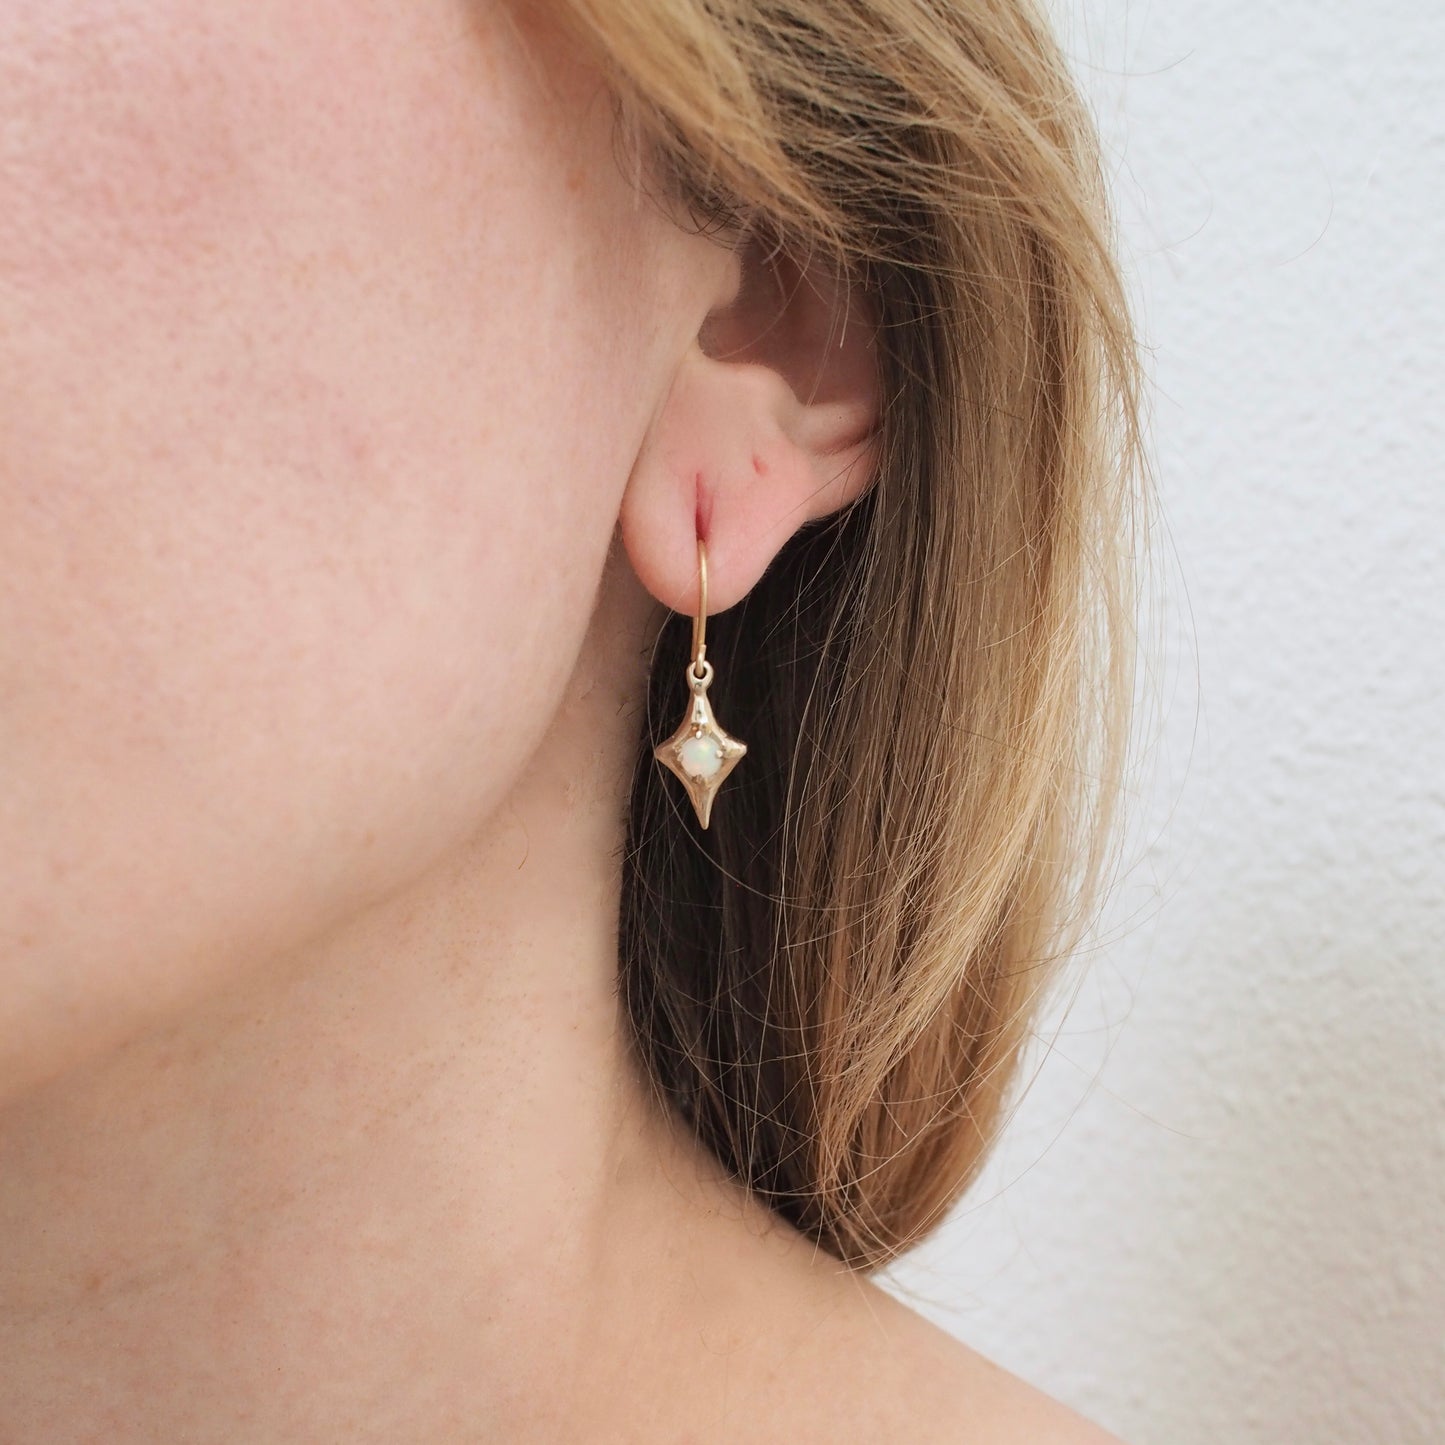 Four point star earrings from Iron Oxide designs set with 4mm natural opals on a model's ear